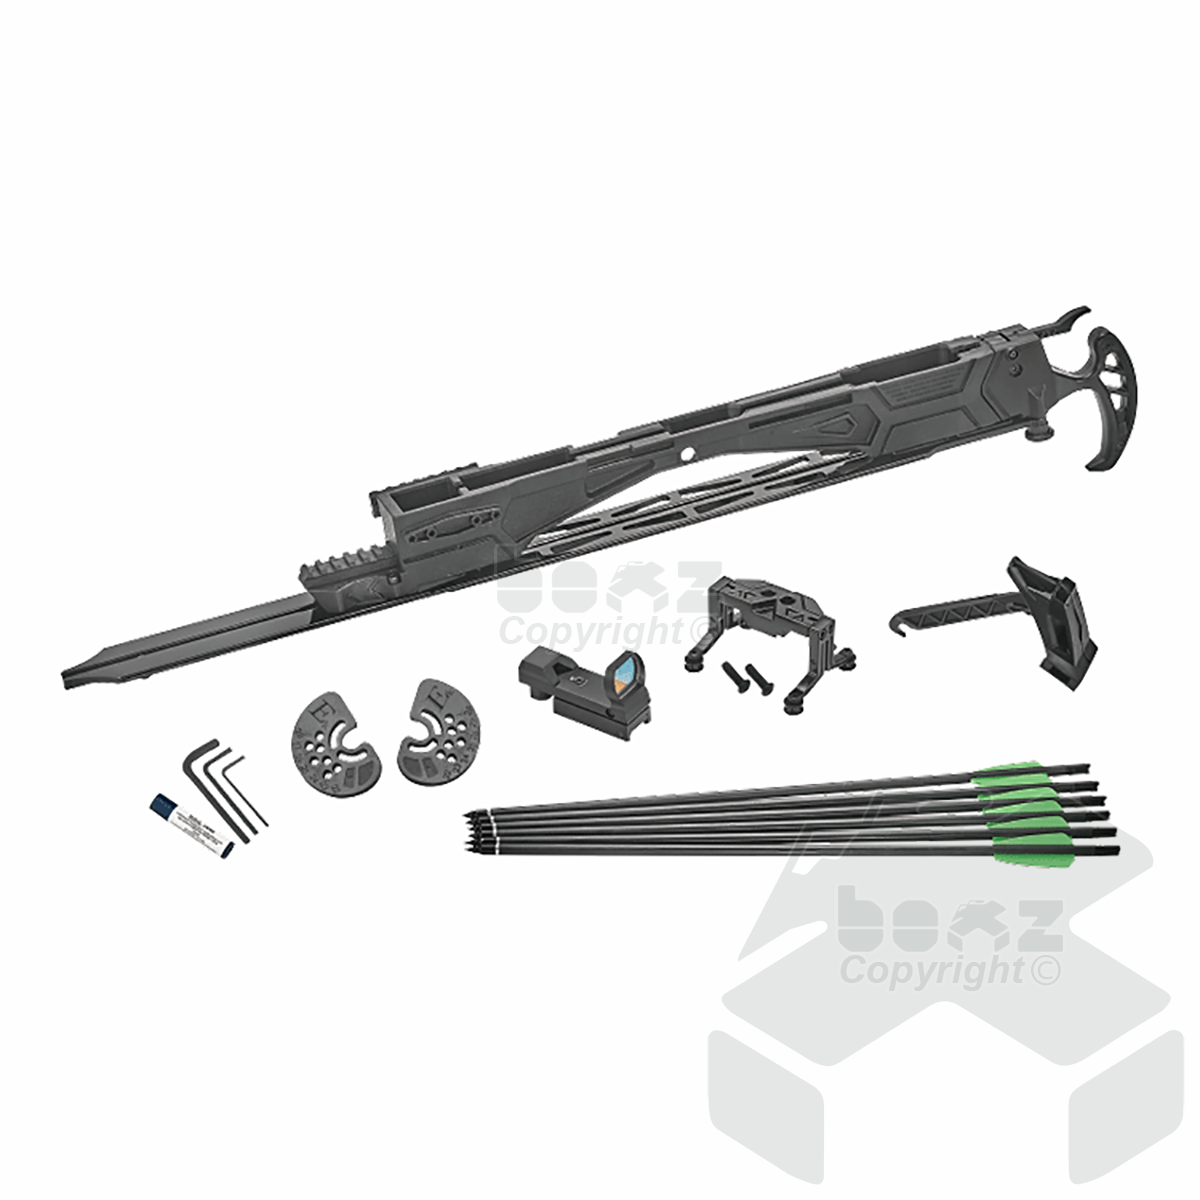 EK Archery Accessory Package for Whipshot Compound Bow